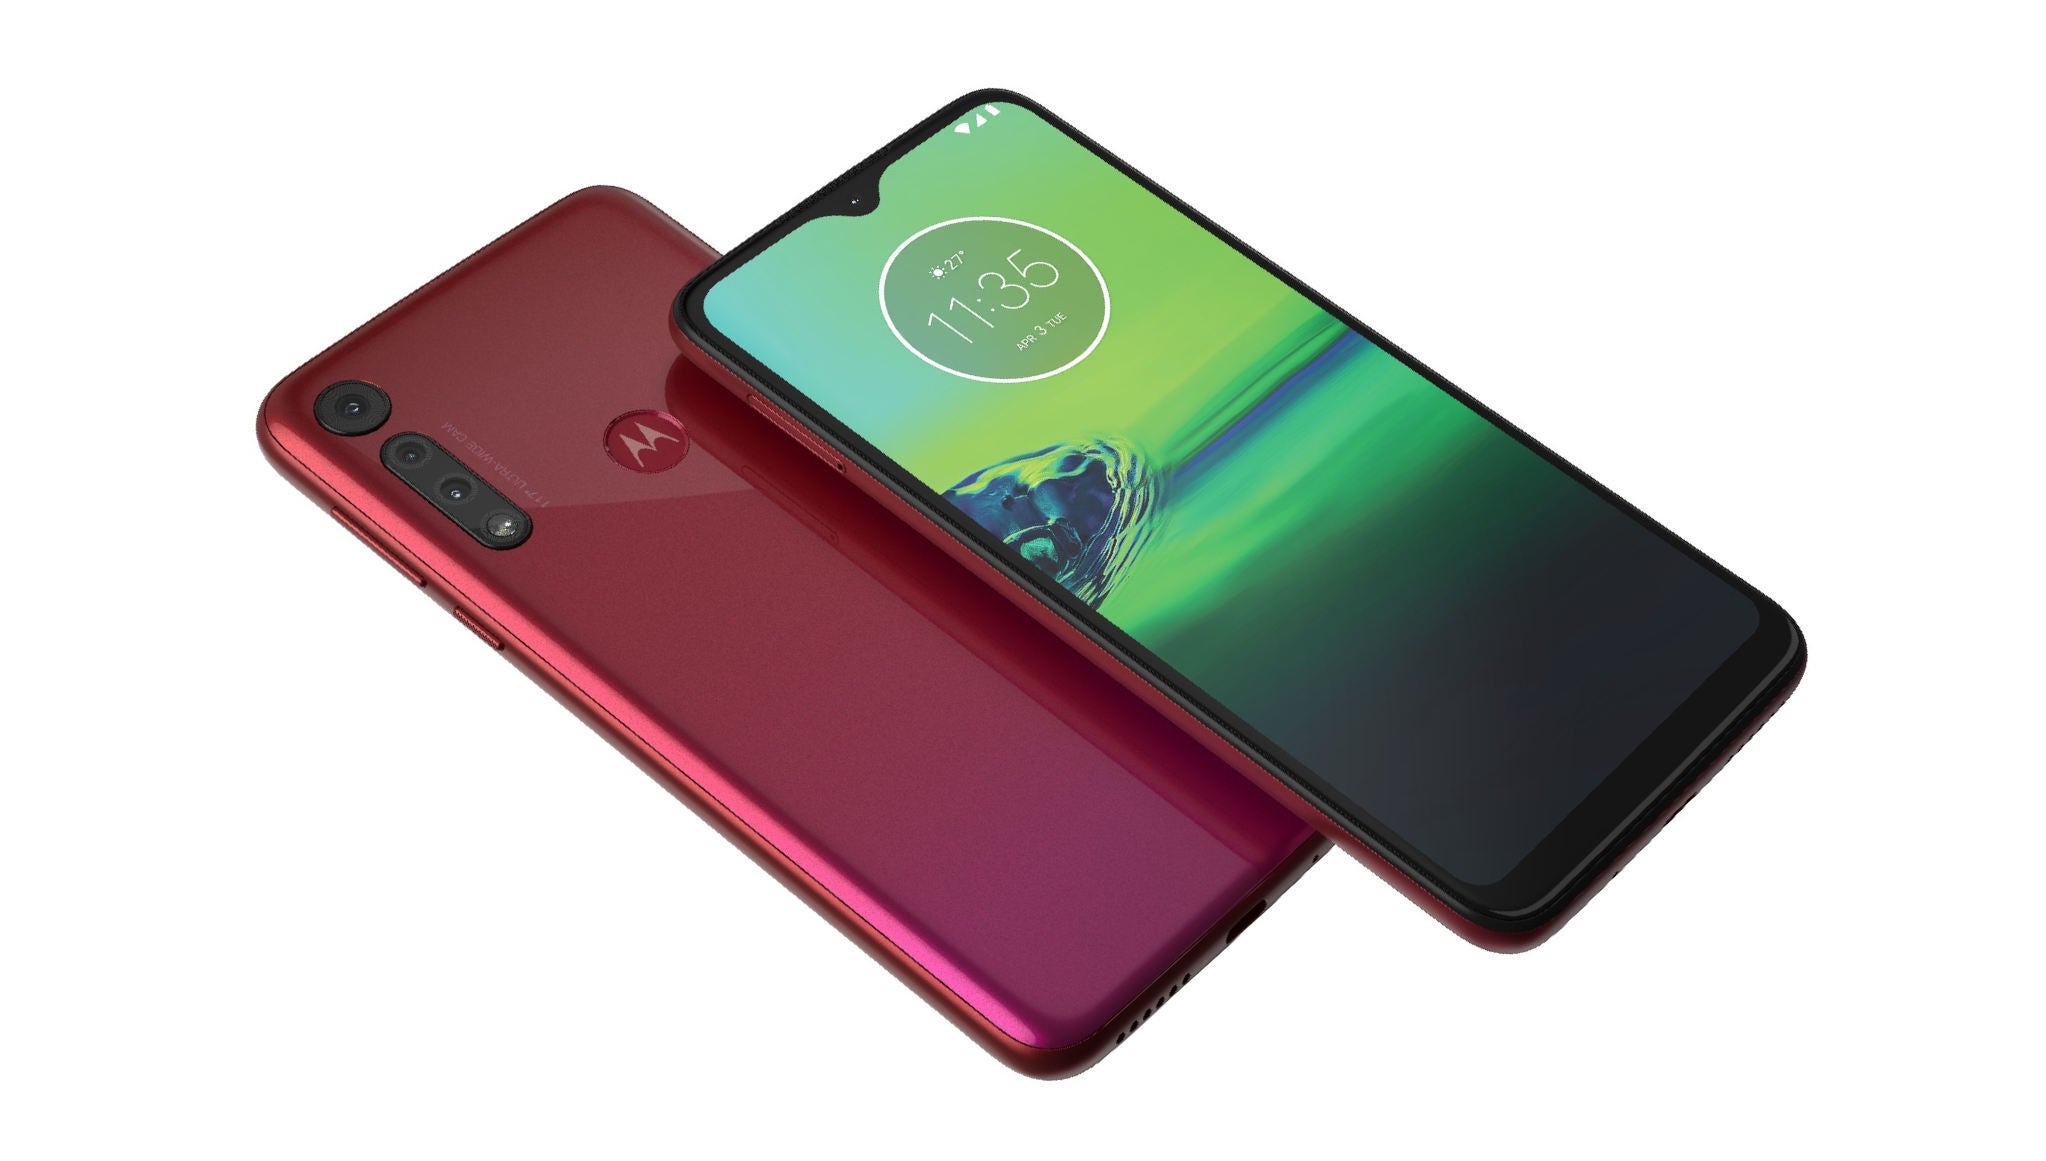 The Moto G8 Plus and G8 Play are official: specs, price and release date